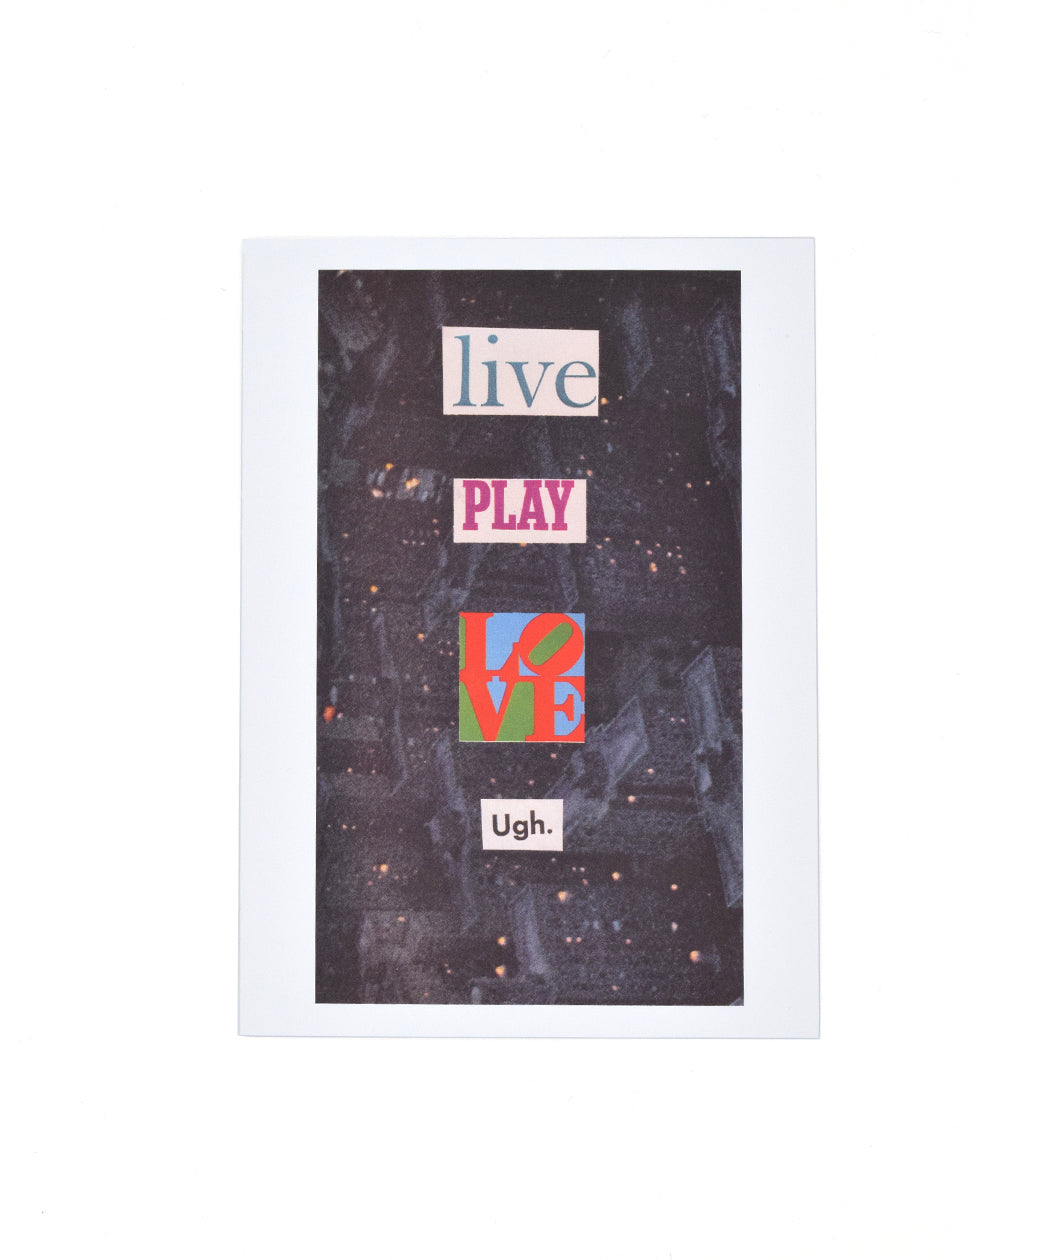 A white greeting card with an out of focus of a cityscape image. “Live play love ugh” is in varrying color and text over the whole image - from the Art Assignment